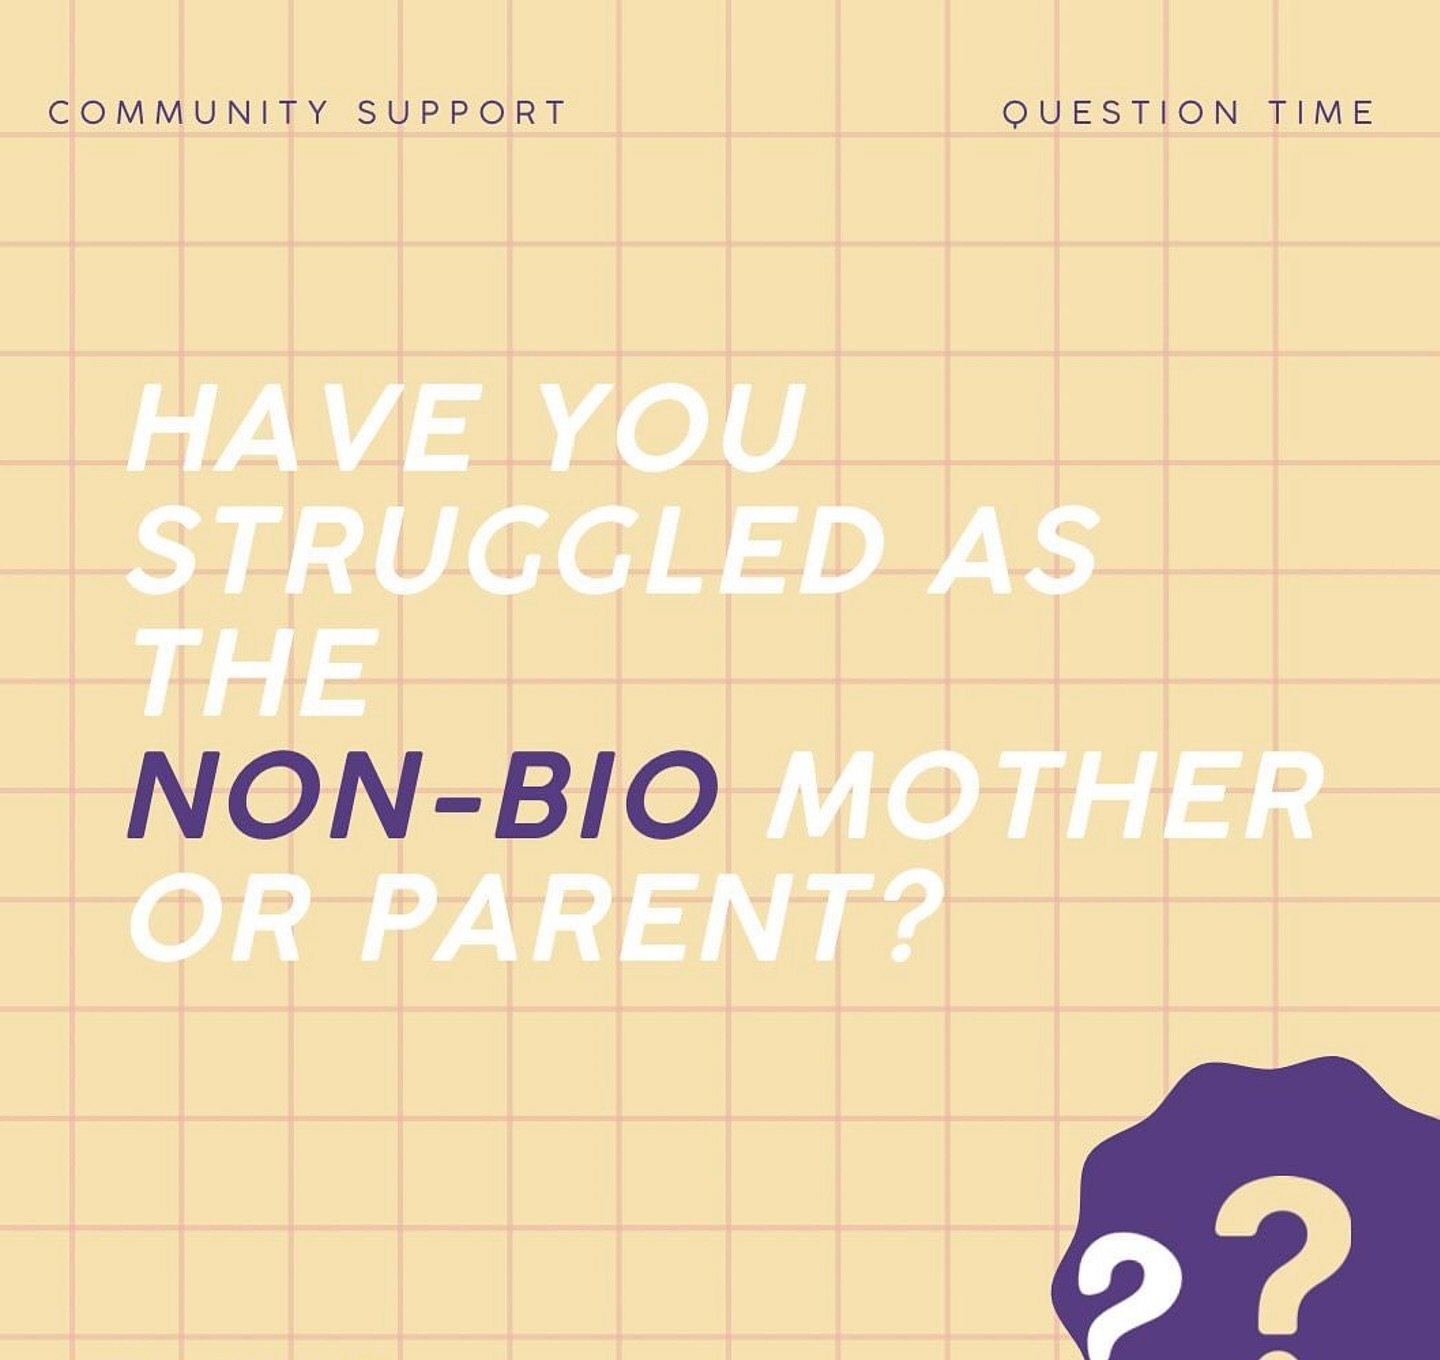 💛QUESTION TIME💛
🤍HAVE YOU STRUGGLED AS THE NON-BIO MAMA OR PARENT?🤍
.
Over the years we have spoken to so many Non-Bio Mamas &amp; parents who expressed that they&rsquo;ve found their role difficult to navigate:
.
Whether it be-
💛Mental Health 
